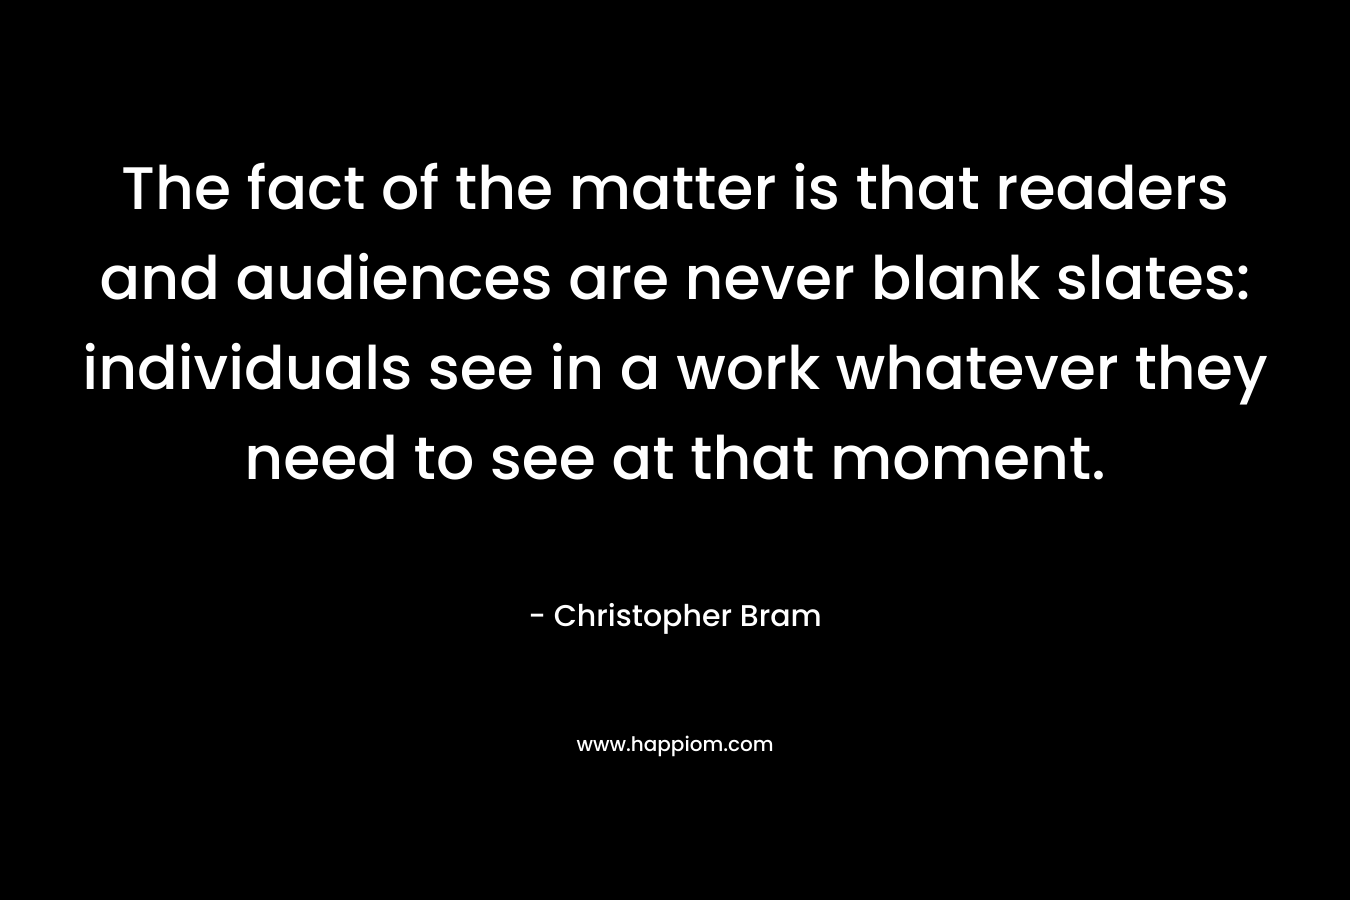 The fact of the matter is that readers and audiences are never blank slates: individuals see in a work whatever they need to see at that moment.